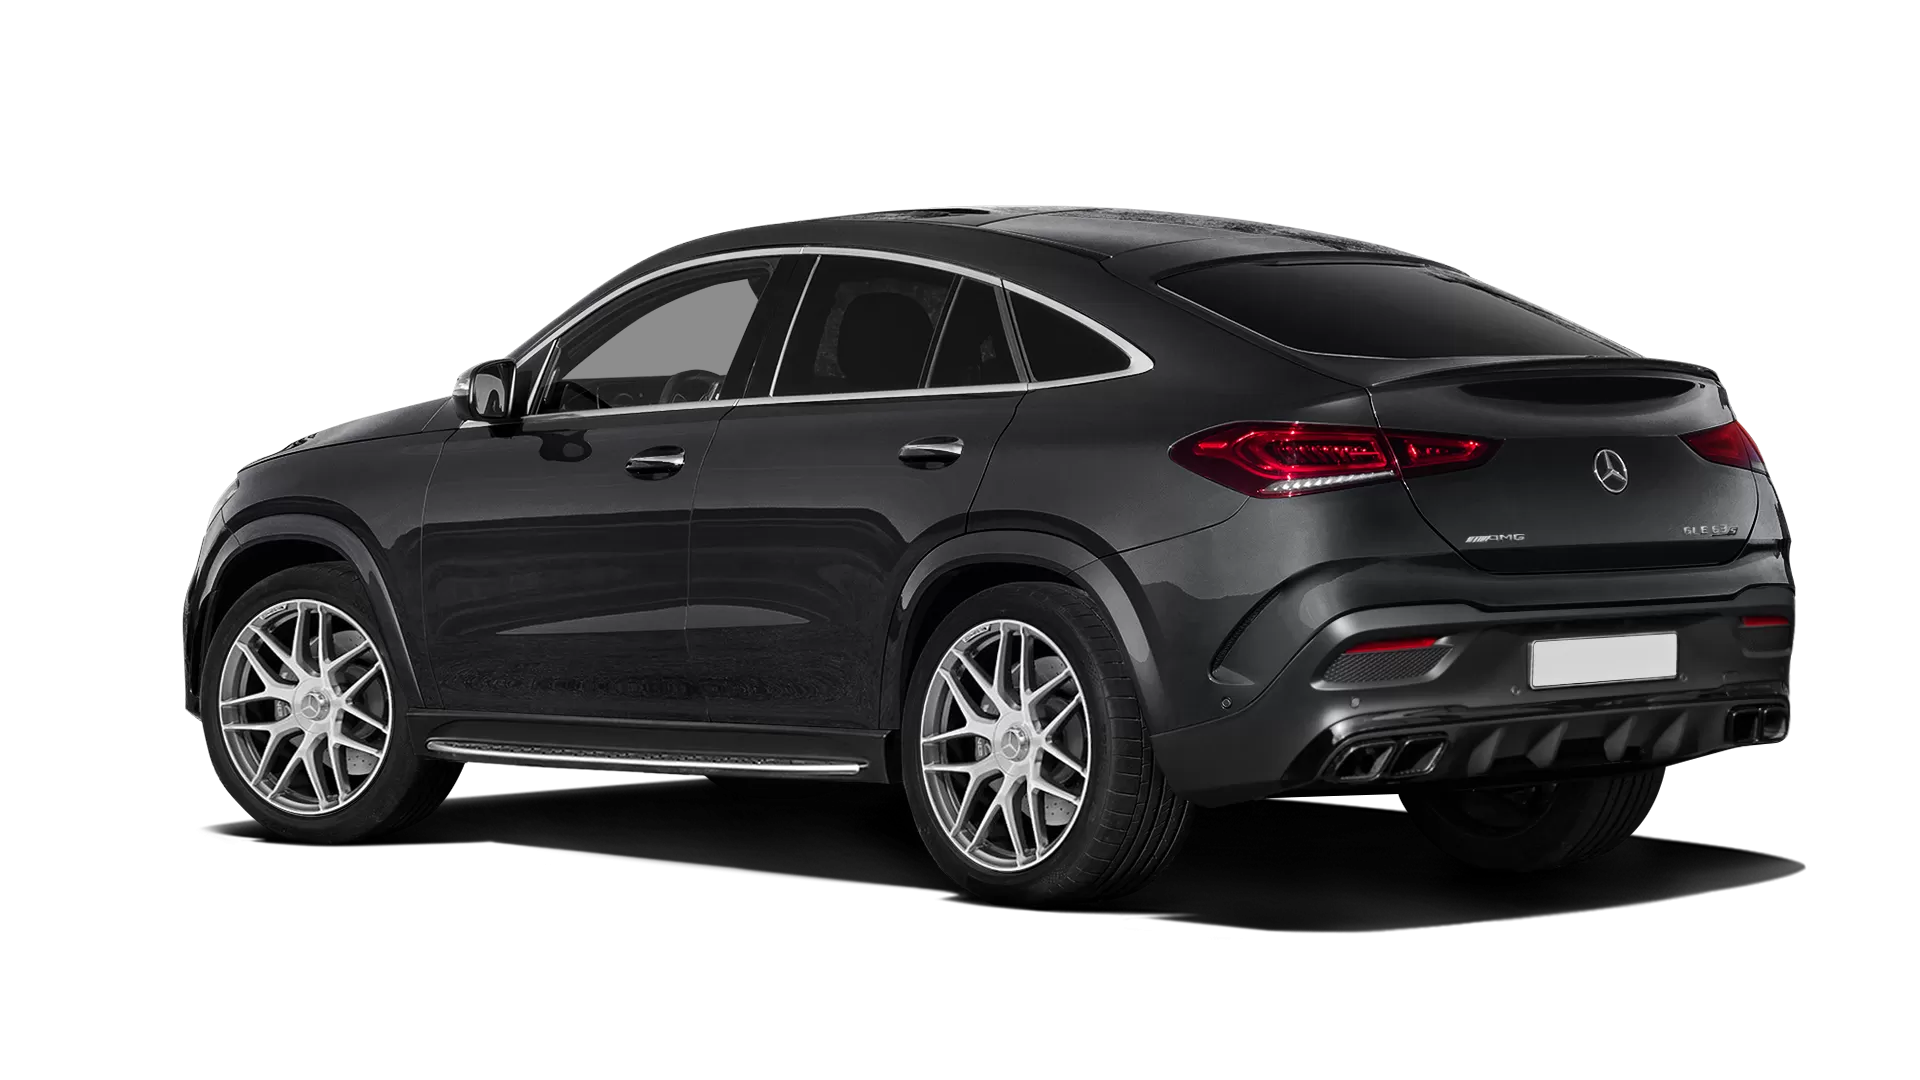 Mercedes GLE Coupe AMG 63 C167 stock rear view in Obsidian Black color